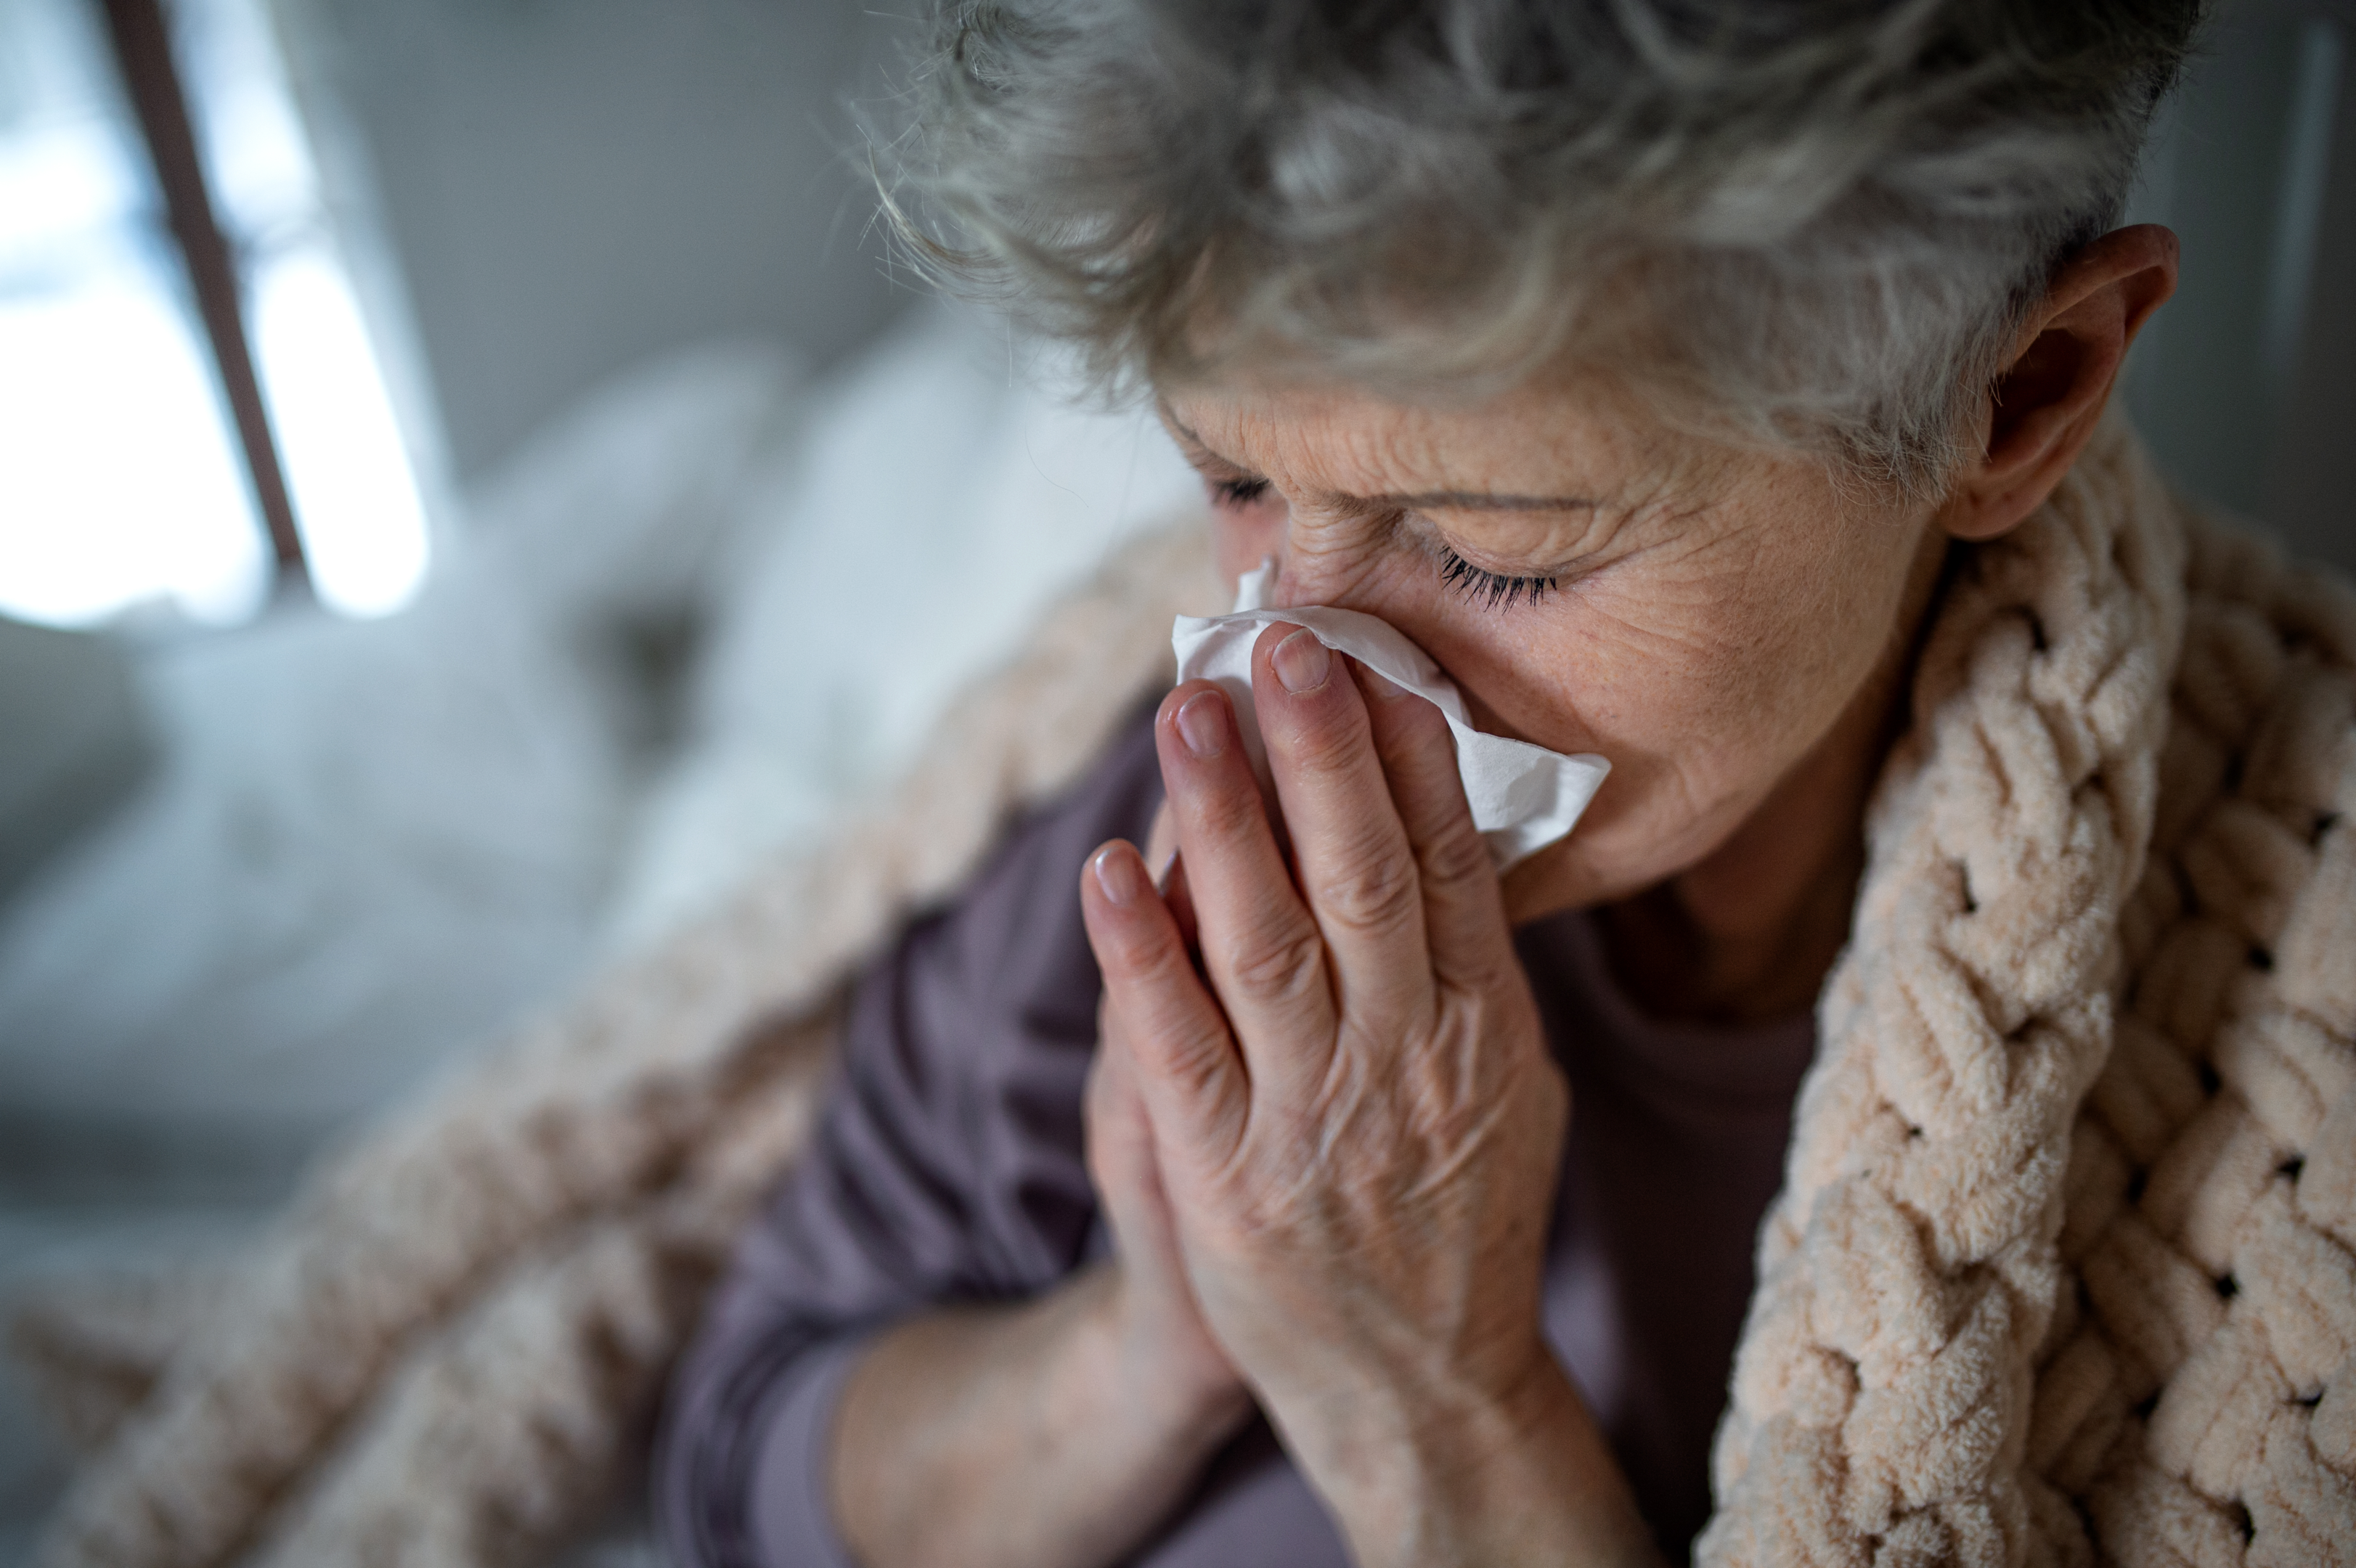 An image showing a senior woman performing throat cleaning, a common practice while taking blood pressure medications.